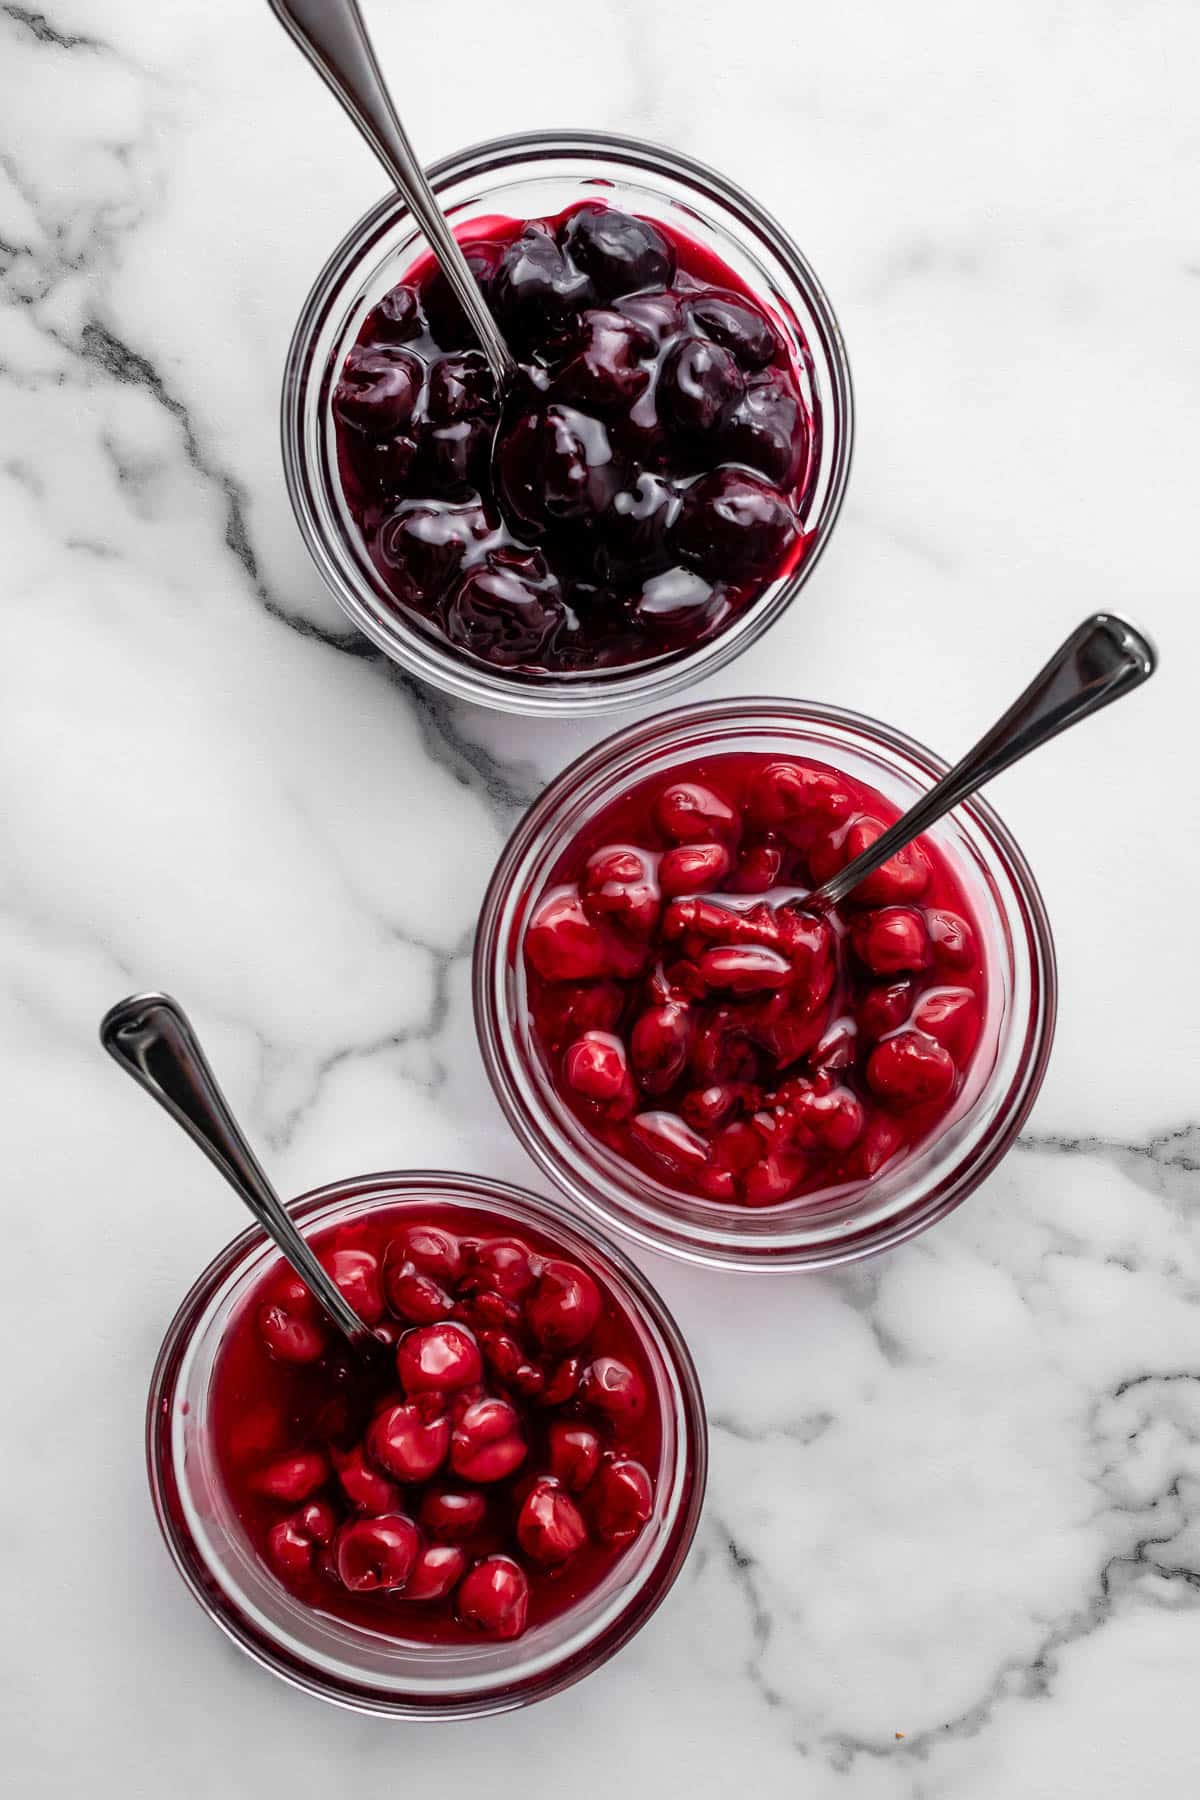 3 bowls of cherry sauce on marble counter.